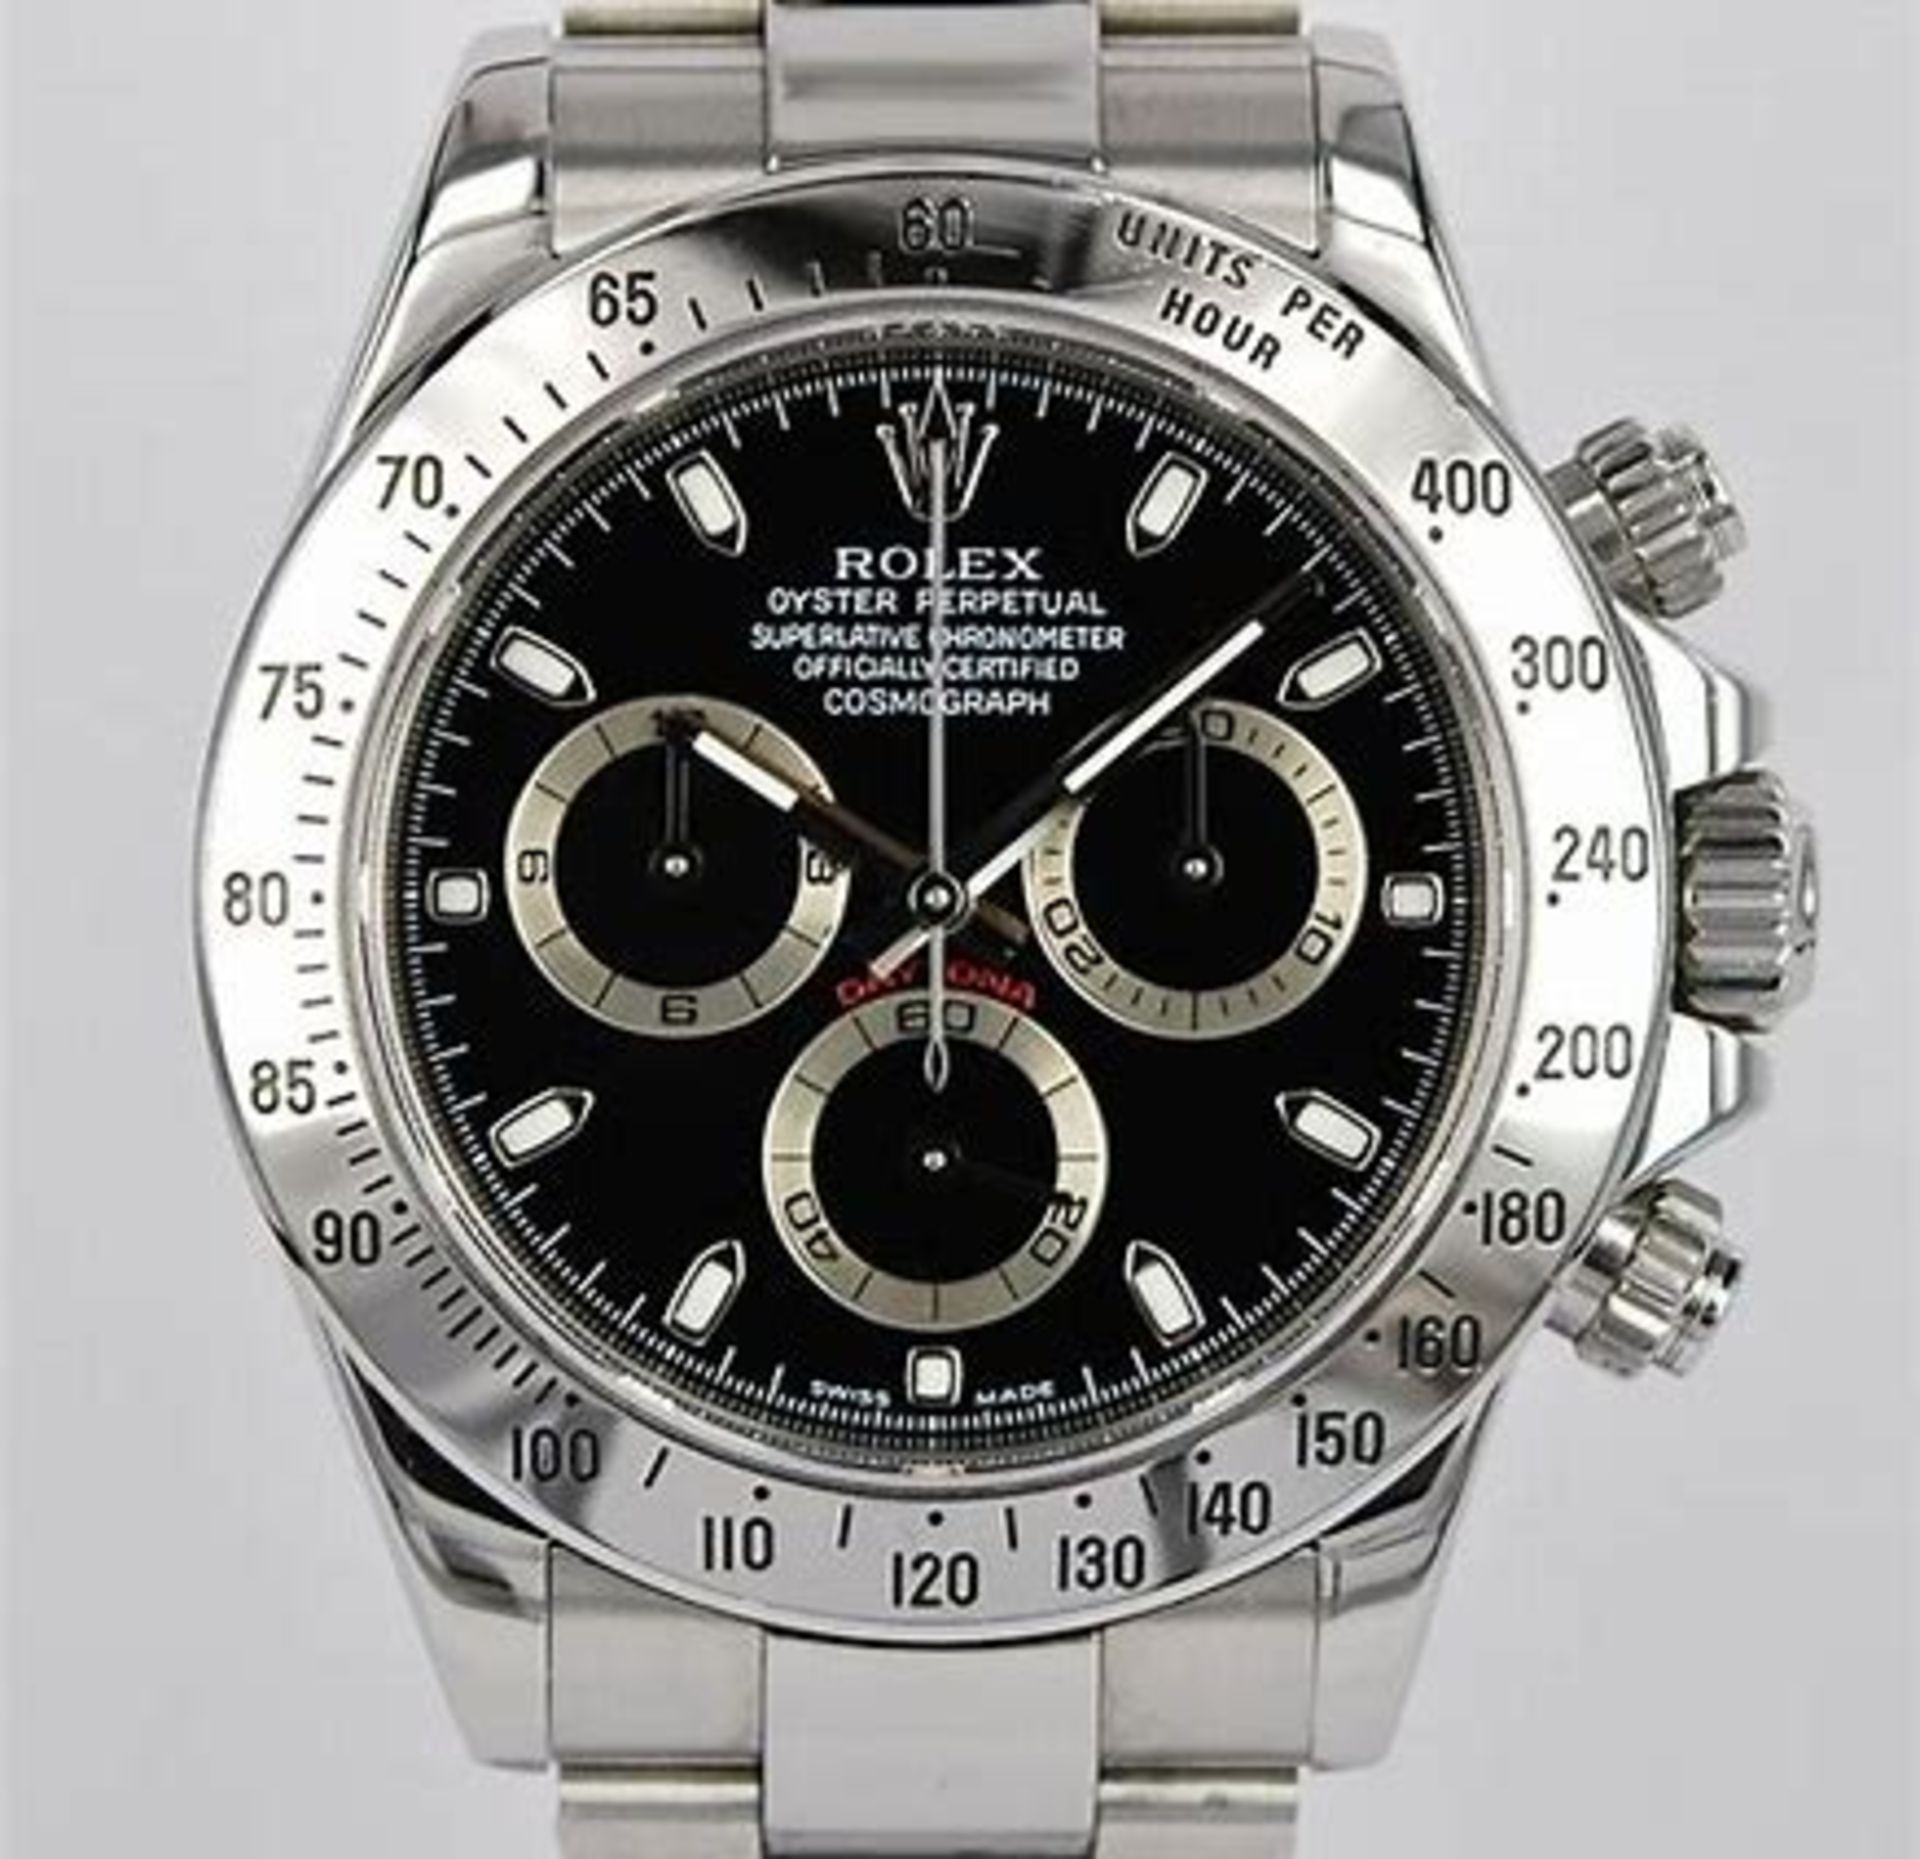 Gents Rolex Daytona Wrist Watch, With Box And Original Papers - Image 4 of 9